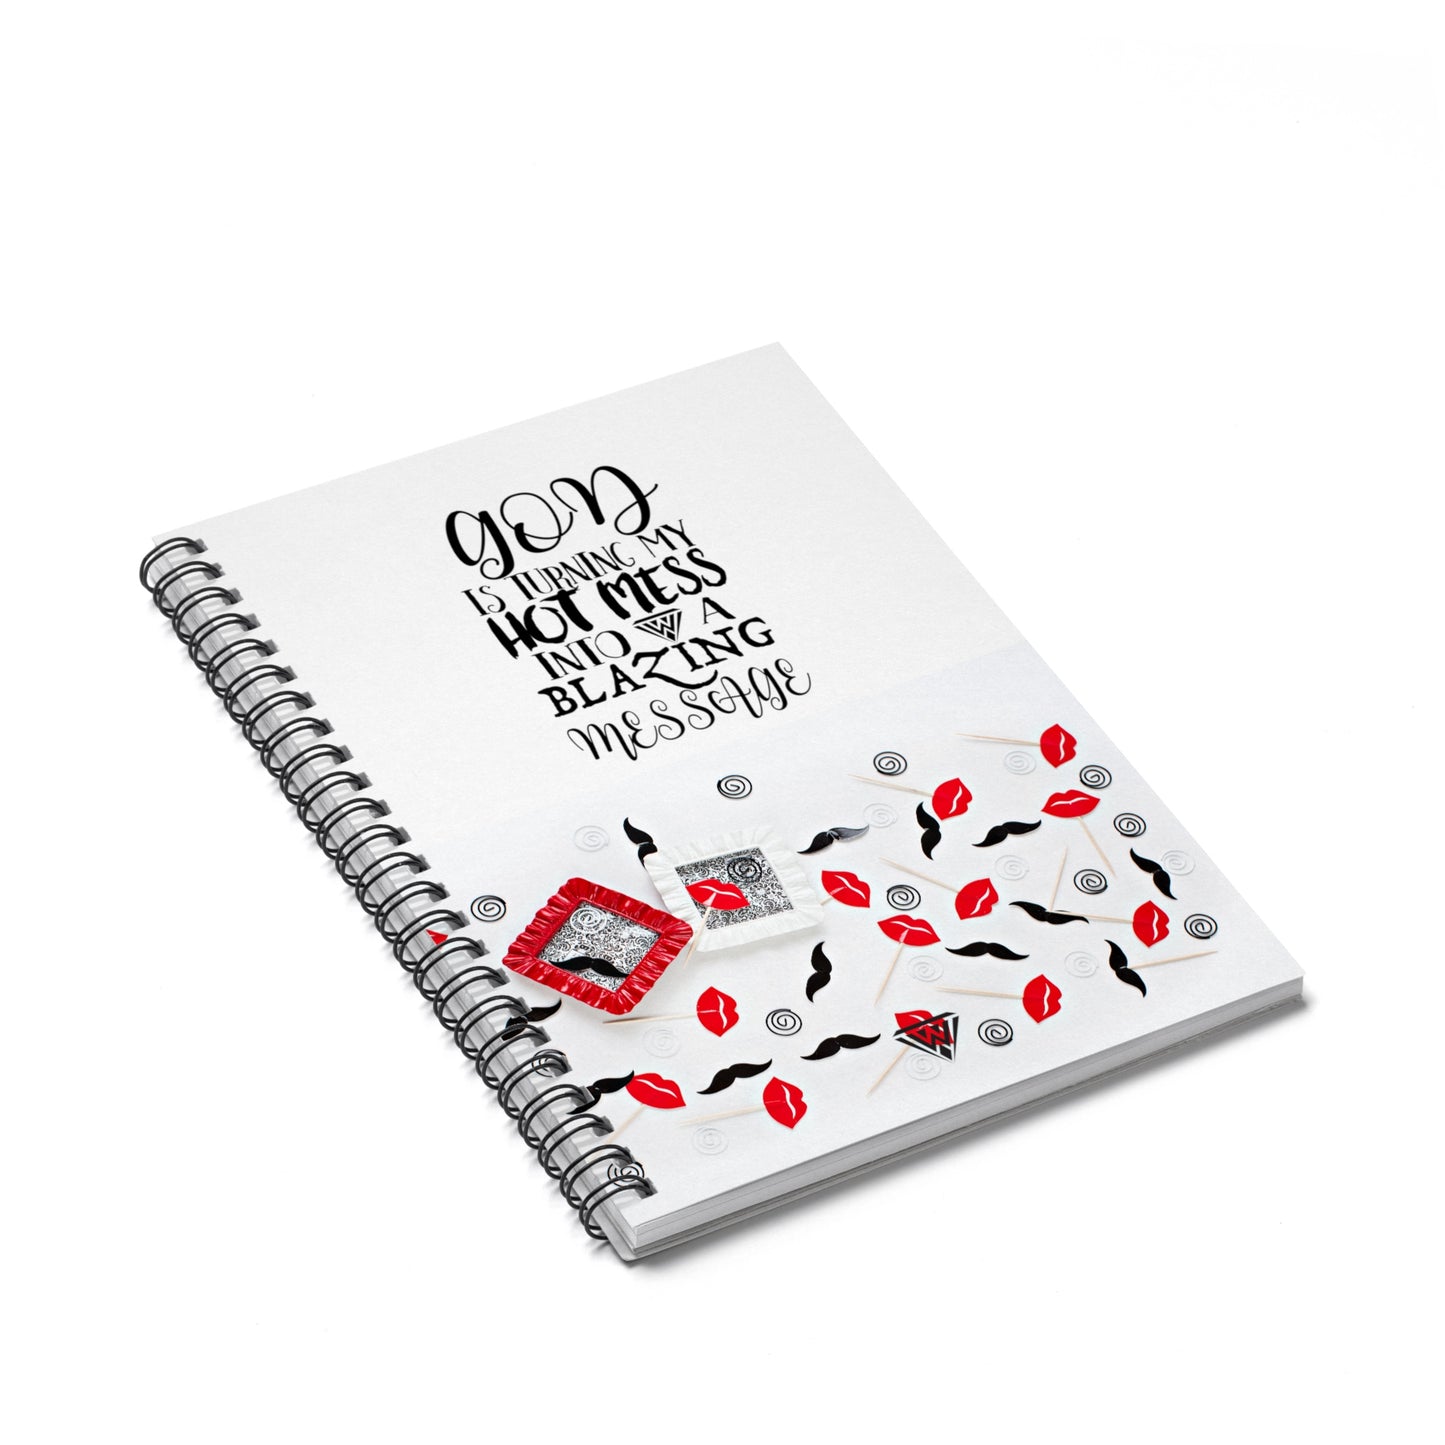 Spiral Notebook - Ruled Line (Red Black Lips Moustache)